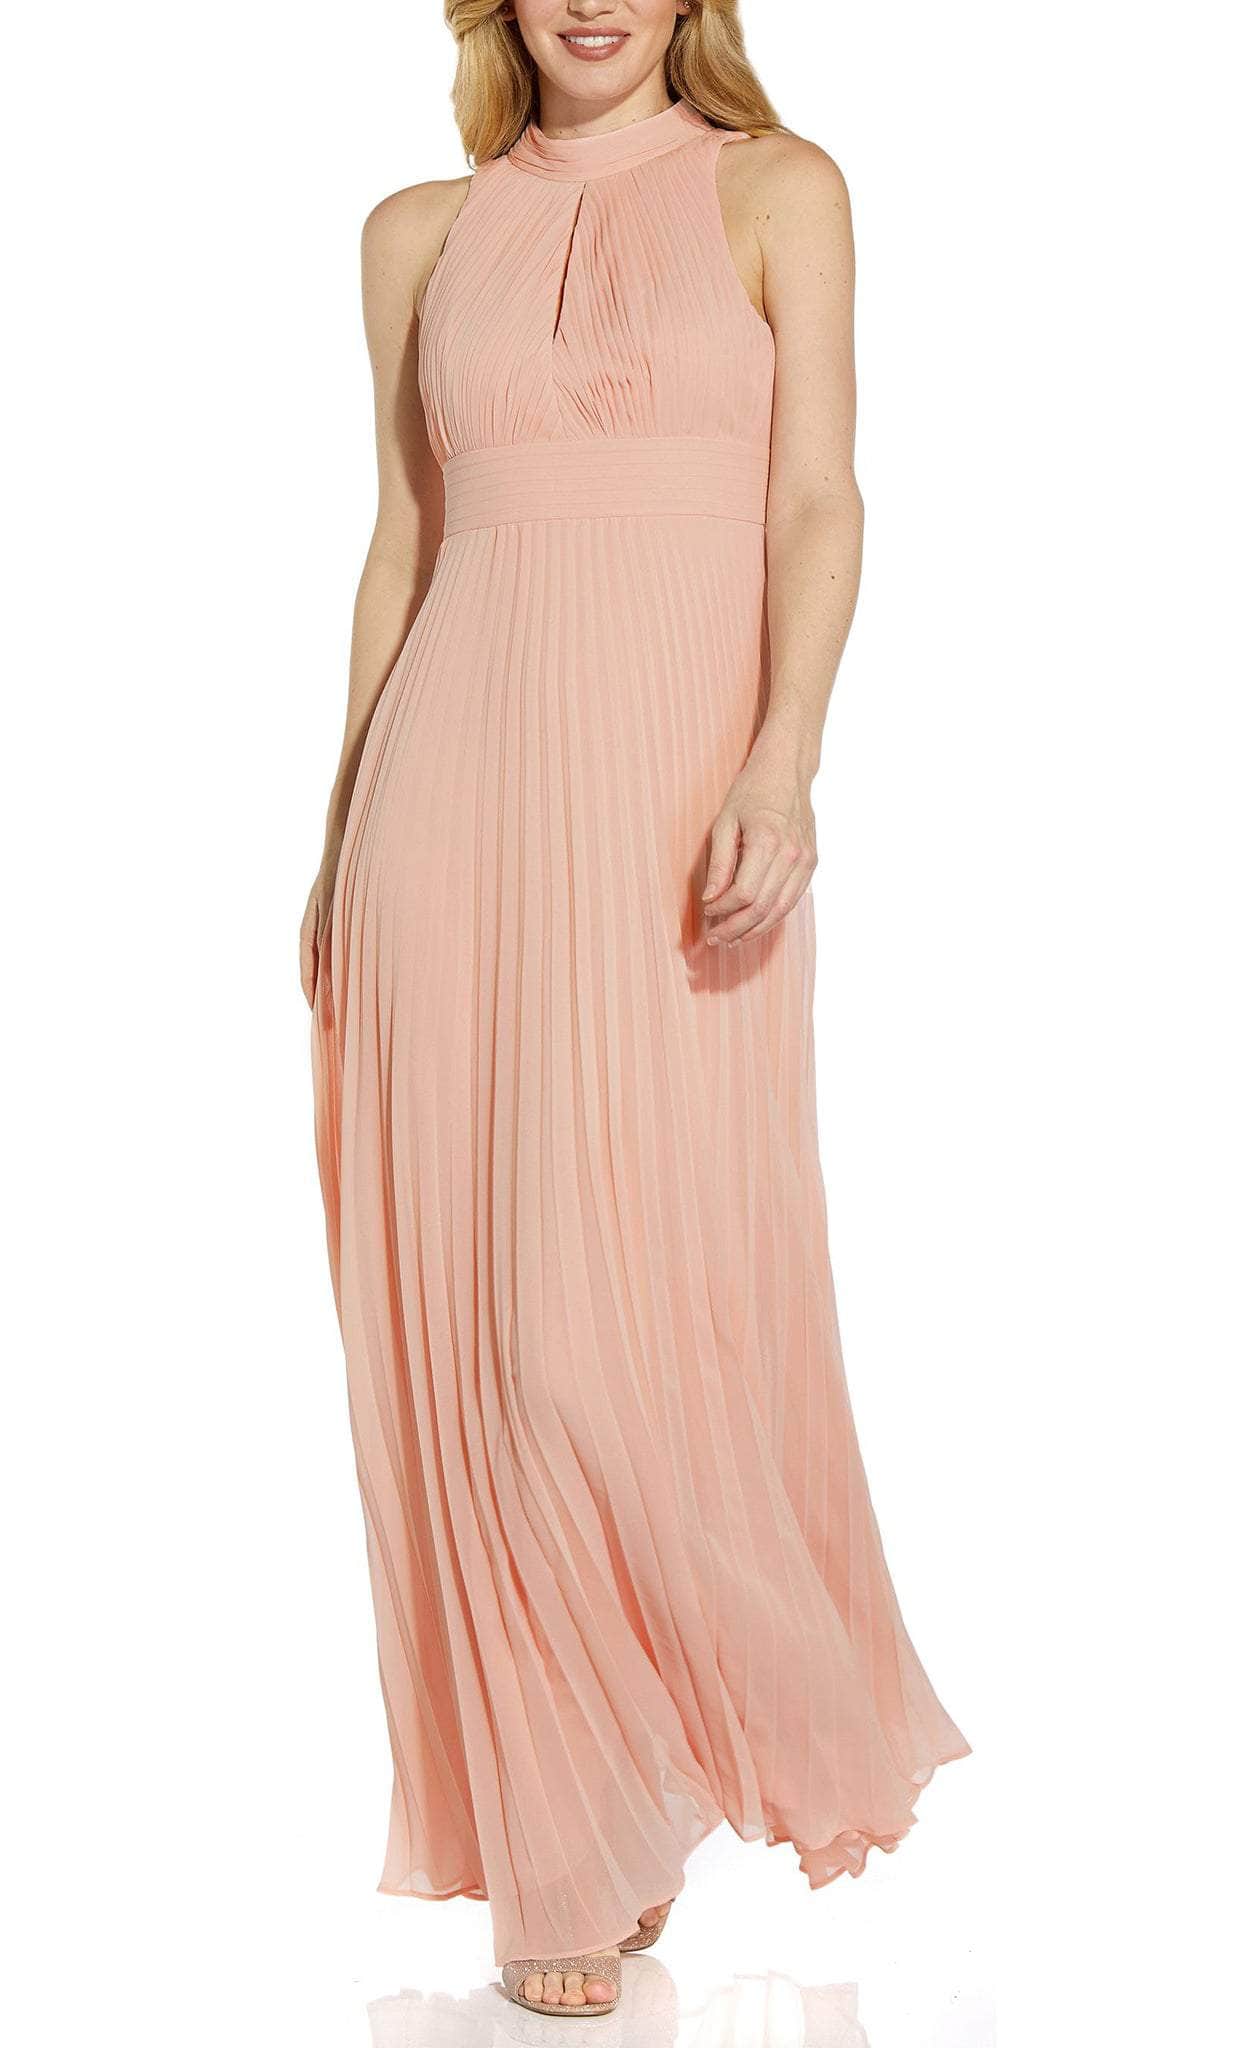 Adrianna Papell AP1E208859 - High Neck Pleated A-line Dress Special Occasion Dress 6 / Mellow Blush